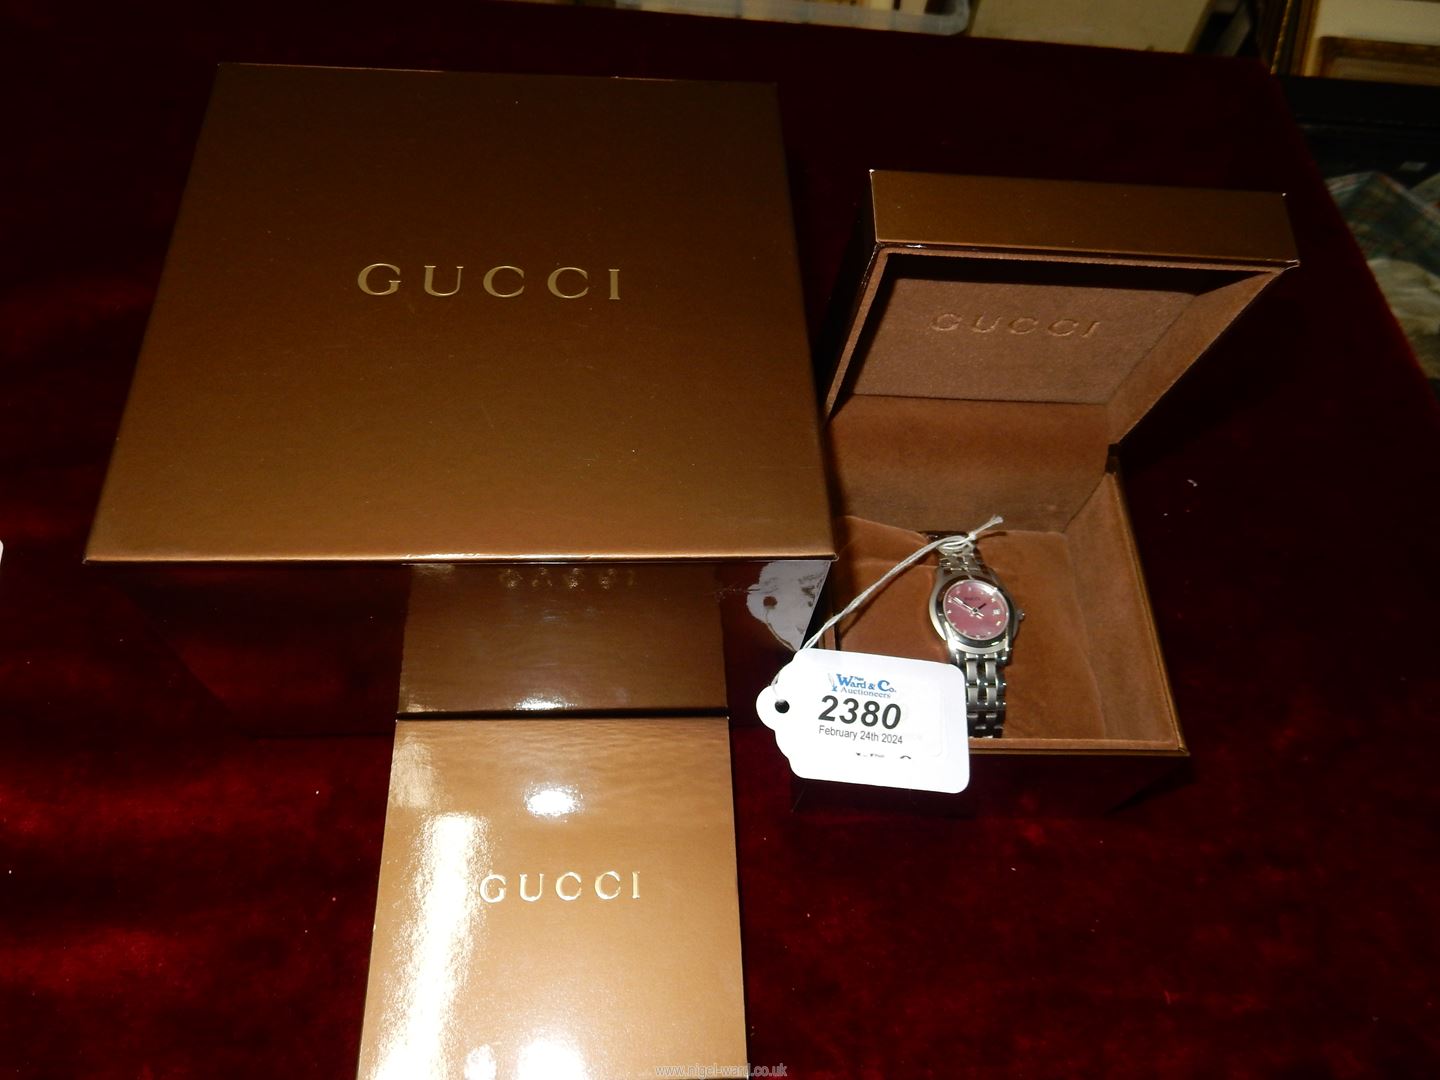 A Gucci Diamond and stainless steel 5500L Bracelet Wristwatch, mother of pearl dial, - Image 8 of 10